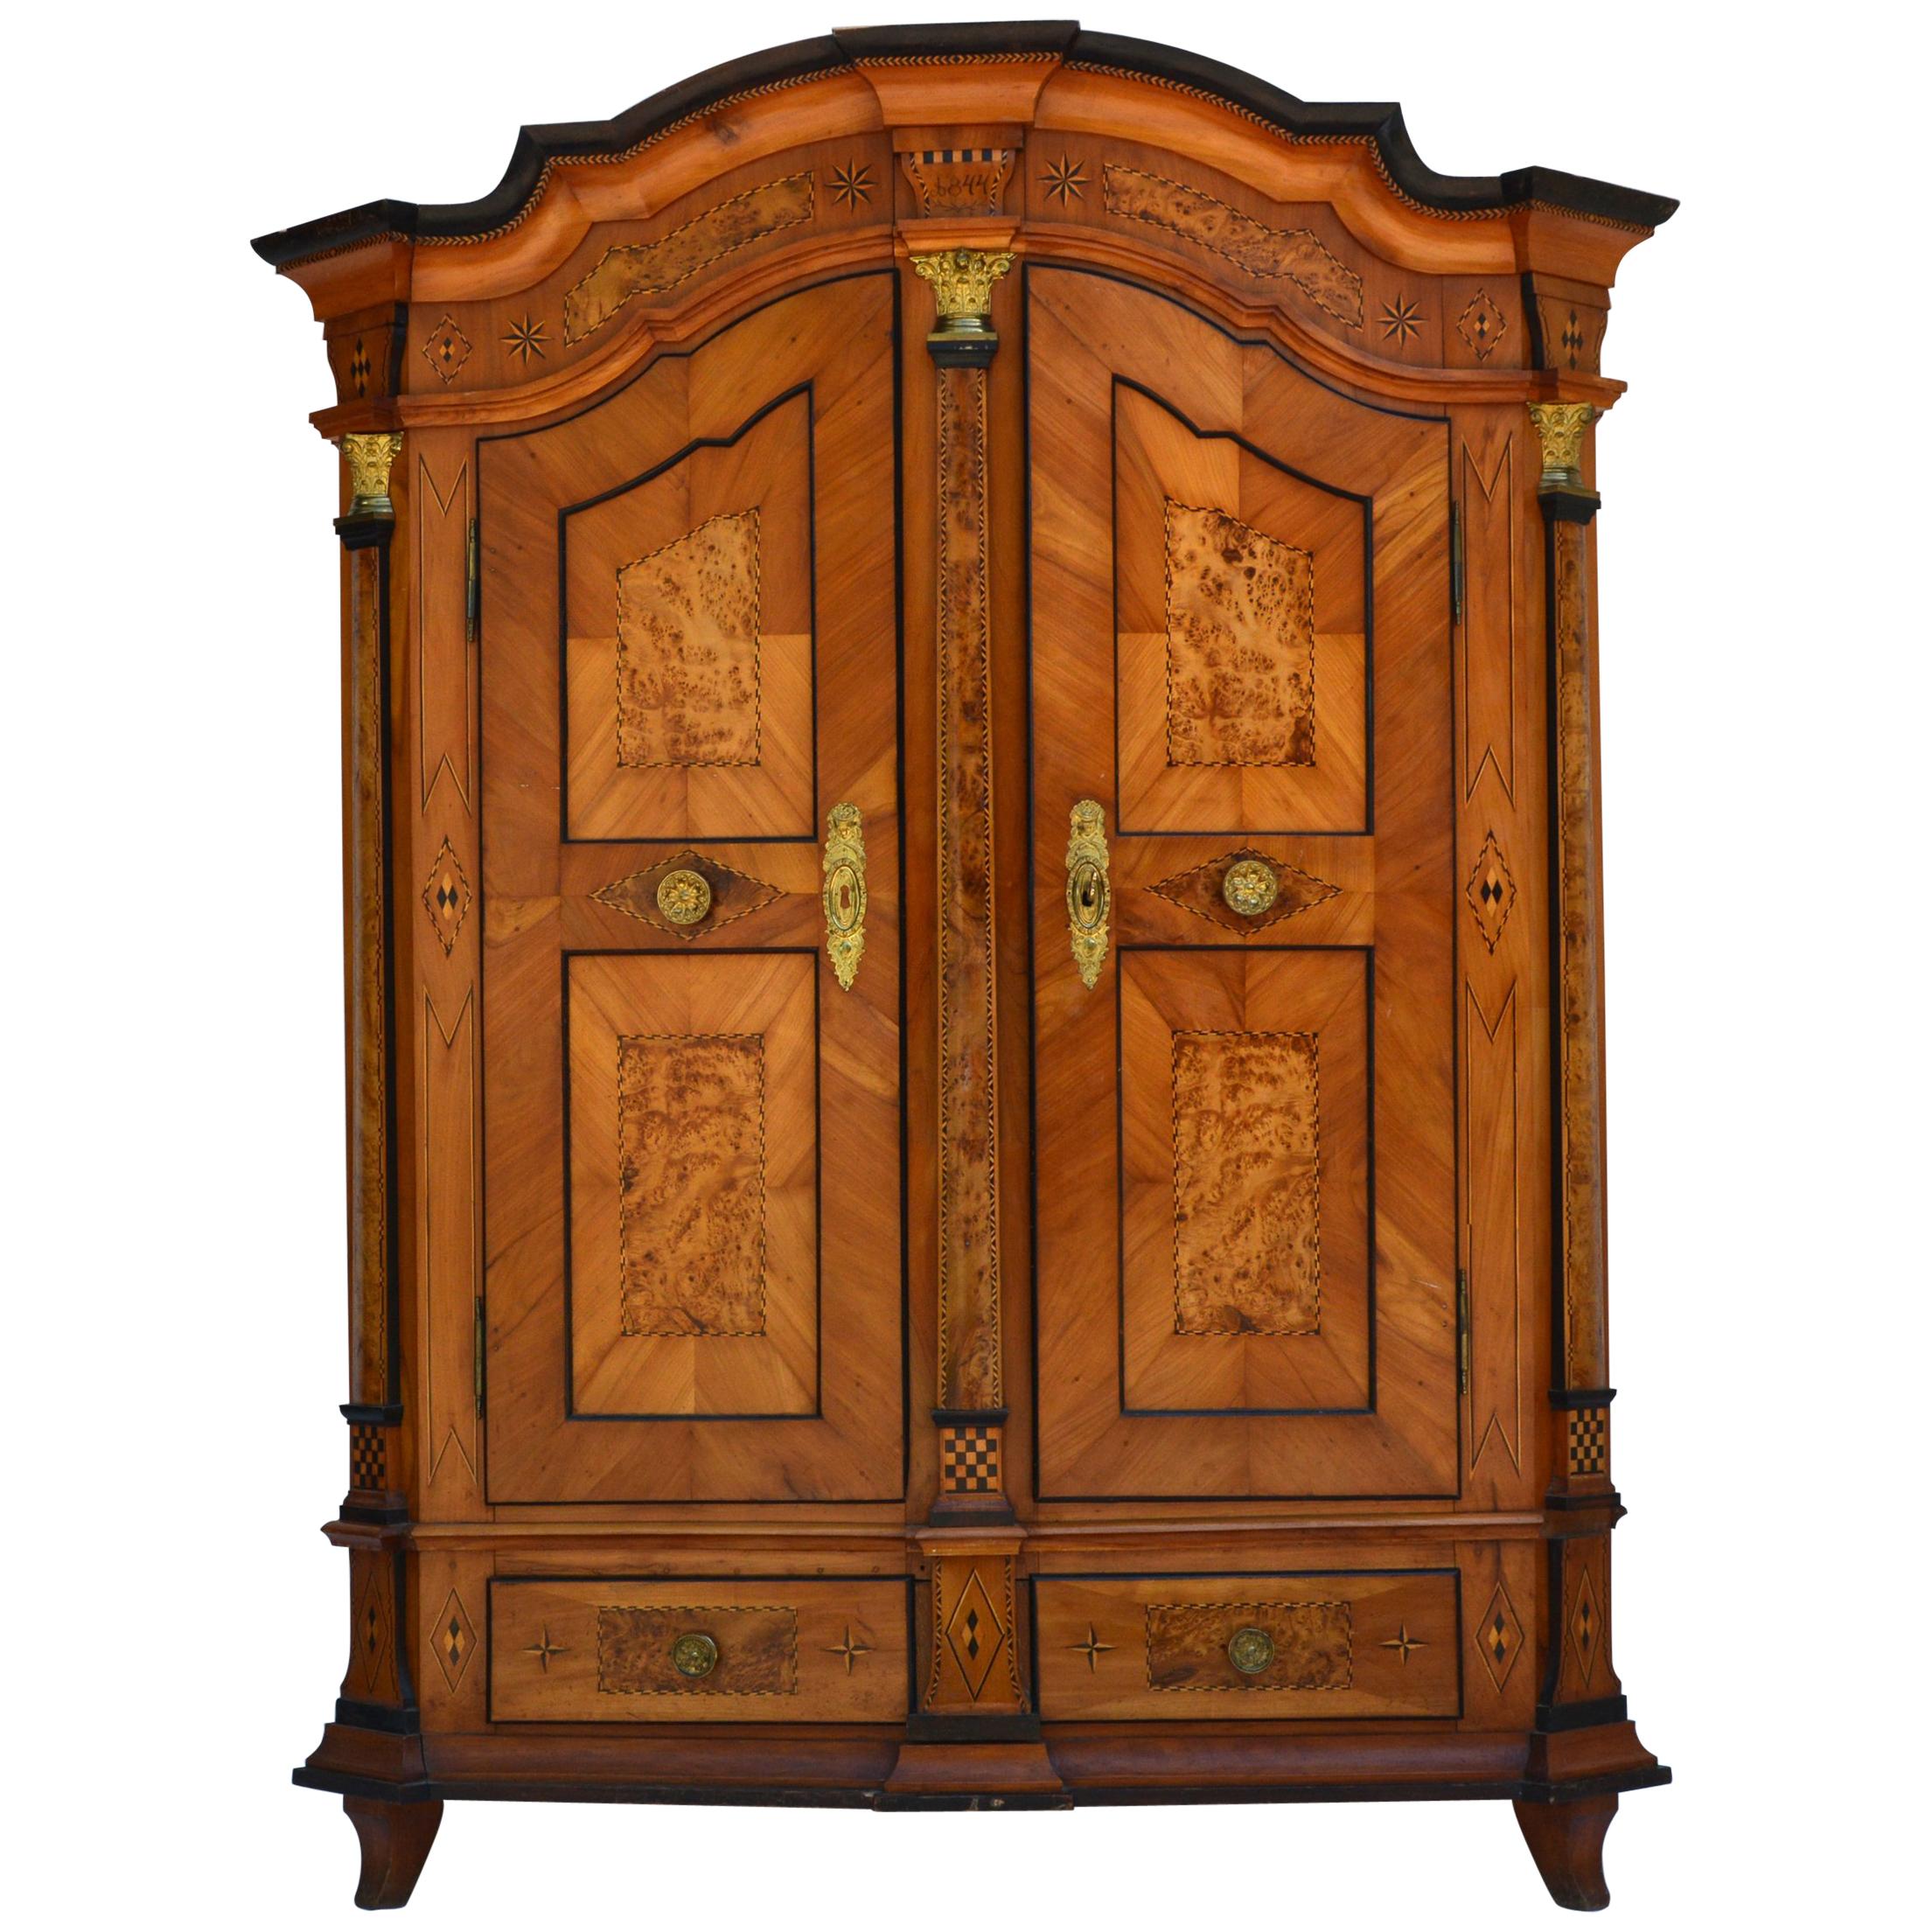 Cabinet from Lindau, Lake Constance, "Bodenseeschrank", Dated 1844